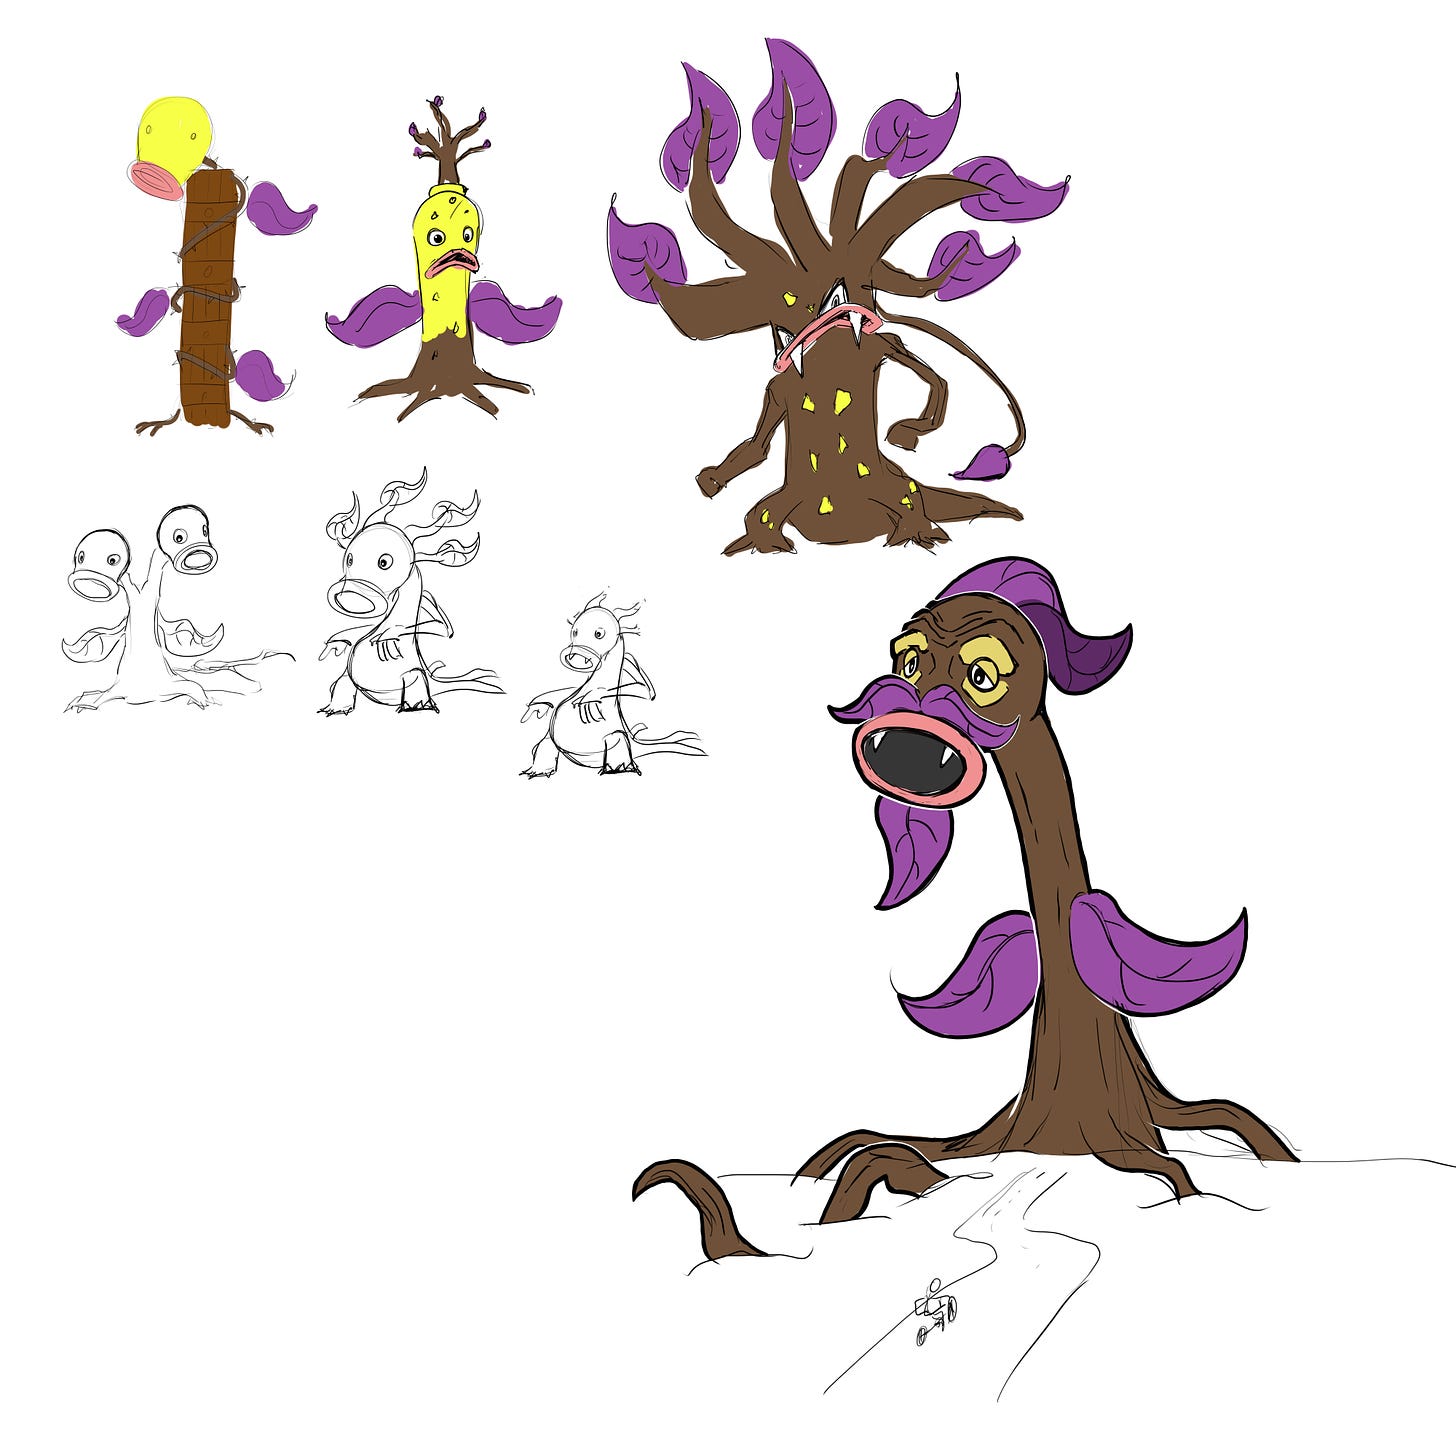 Early sketches of Belltower, including a Weepinbel and Victreebel versions (Artist: Glaedrax)